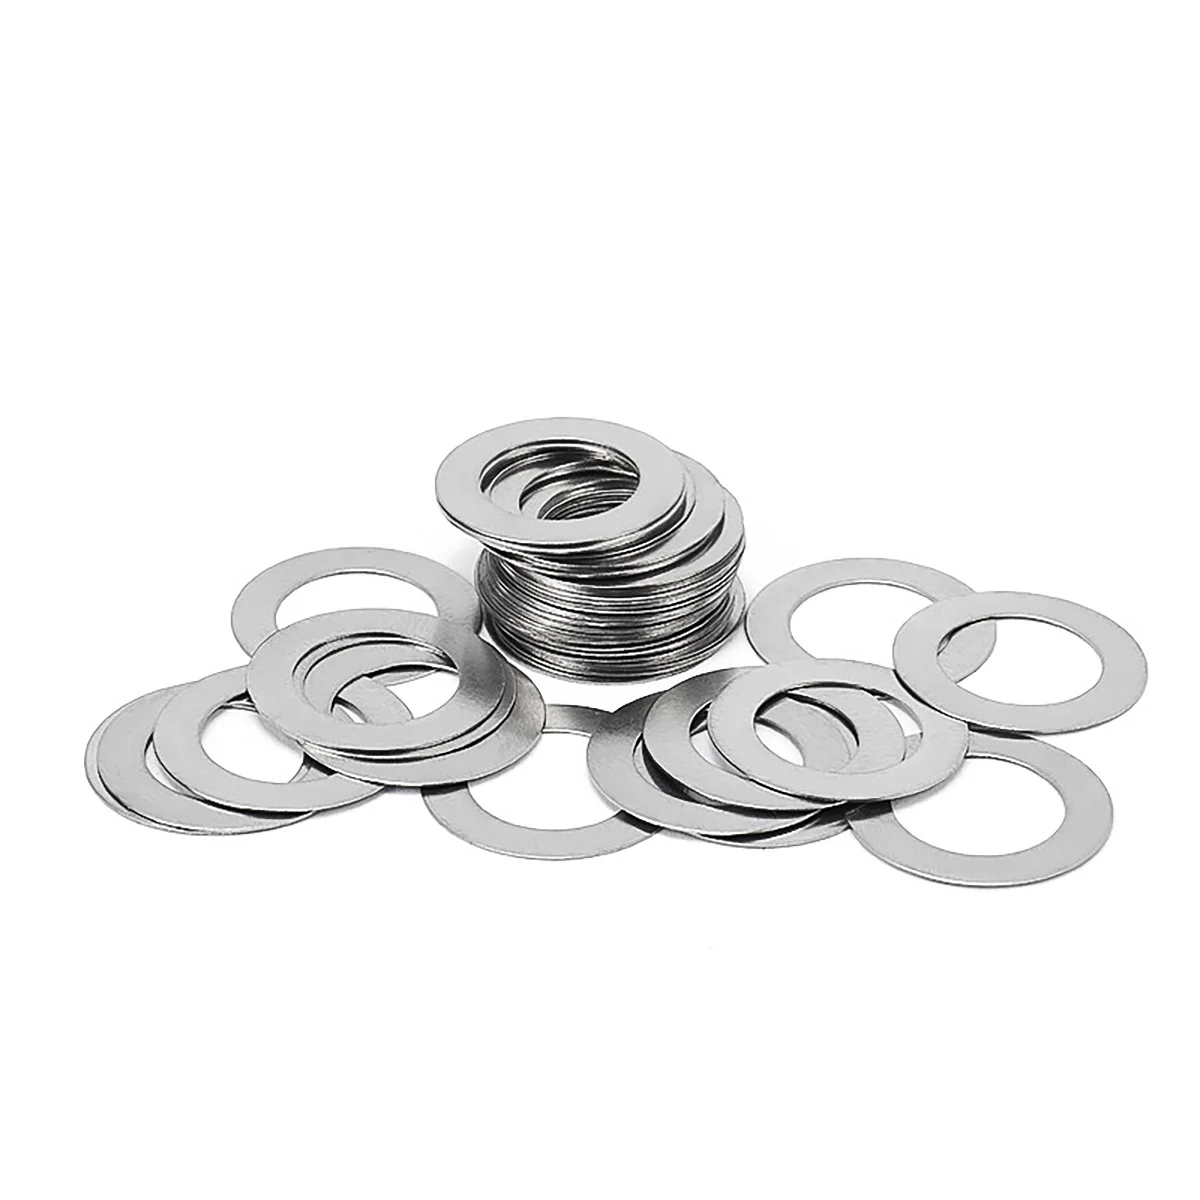 

304 Stainless Steel Ultra-Thin Metal Gasket / Shaft Clearance Flat Gasket Adjustment Washer With Thickness Of 0.1/0.2/0.3/0.5mm